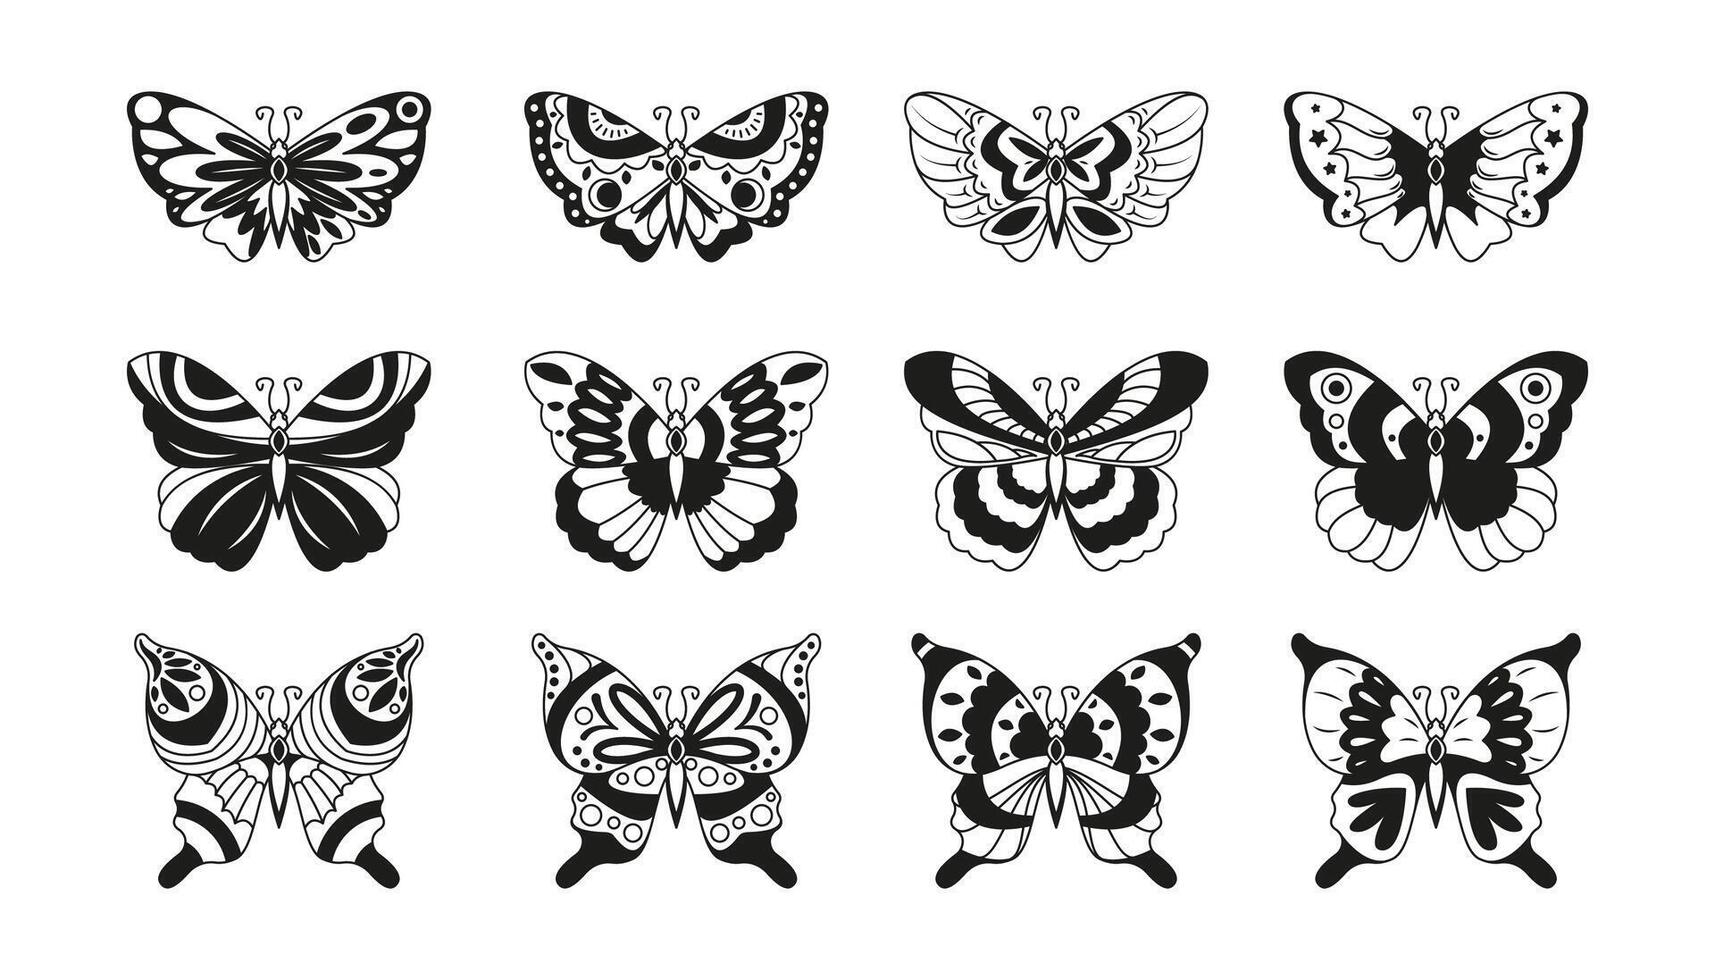 Butterfly tattoo. Black moth outlines with decorative detailing, abstract nature decorative insects. Vector doodle collection